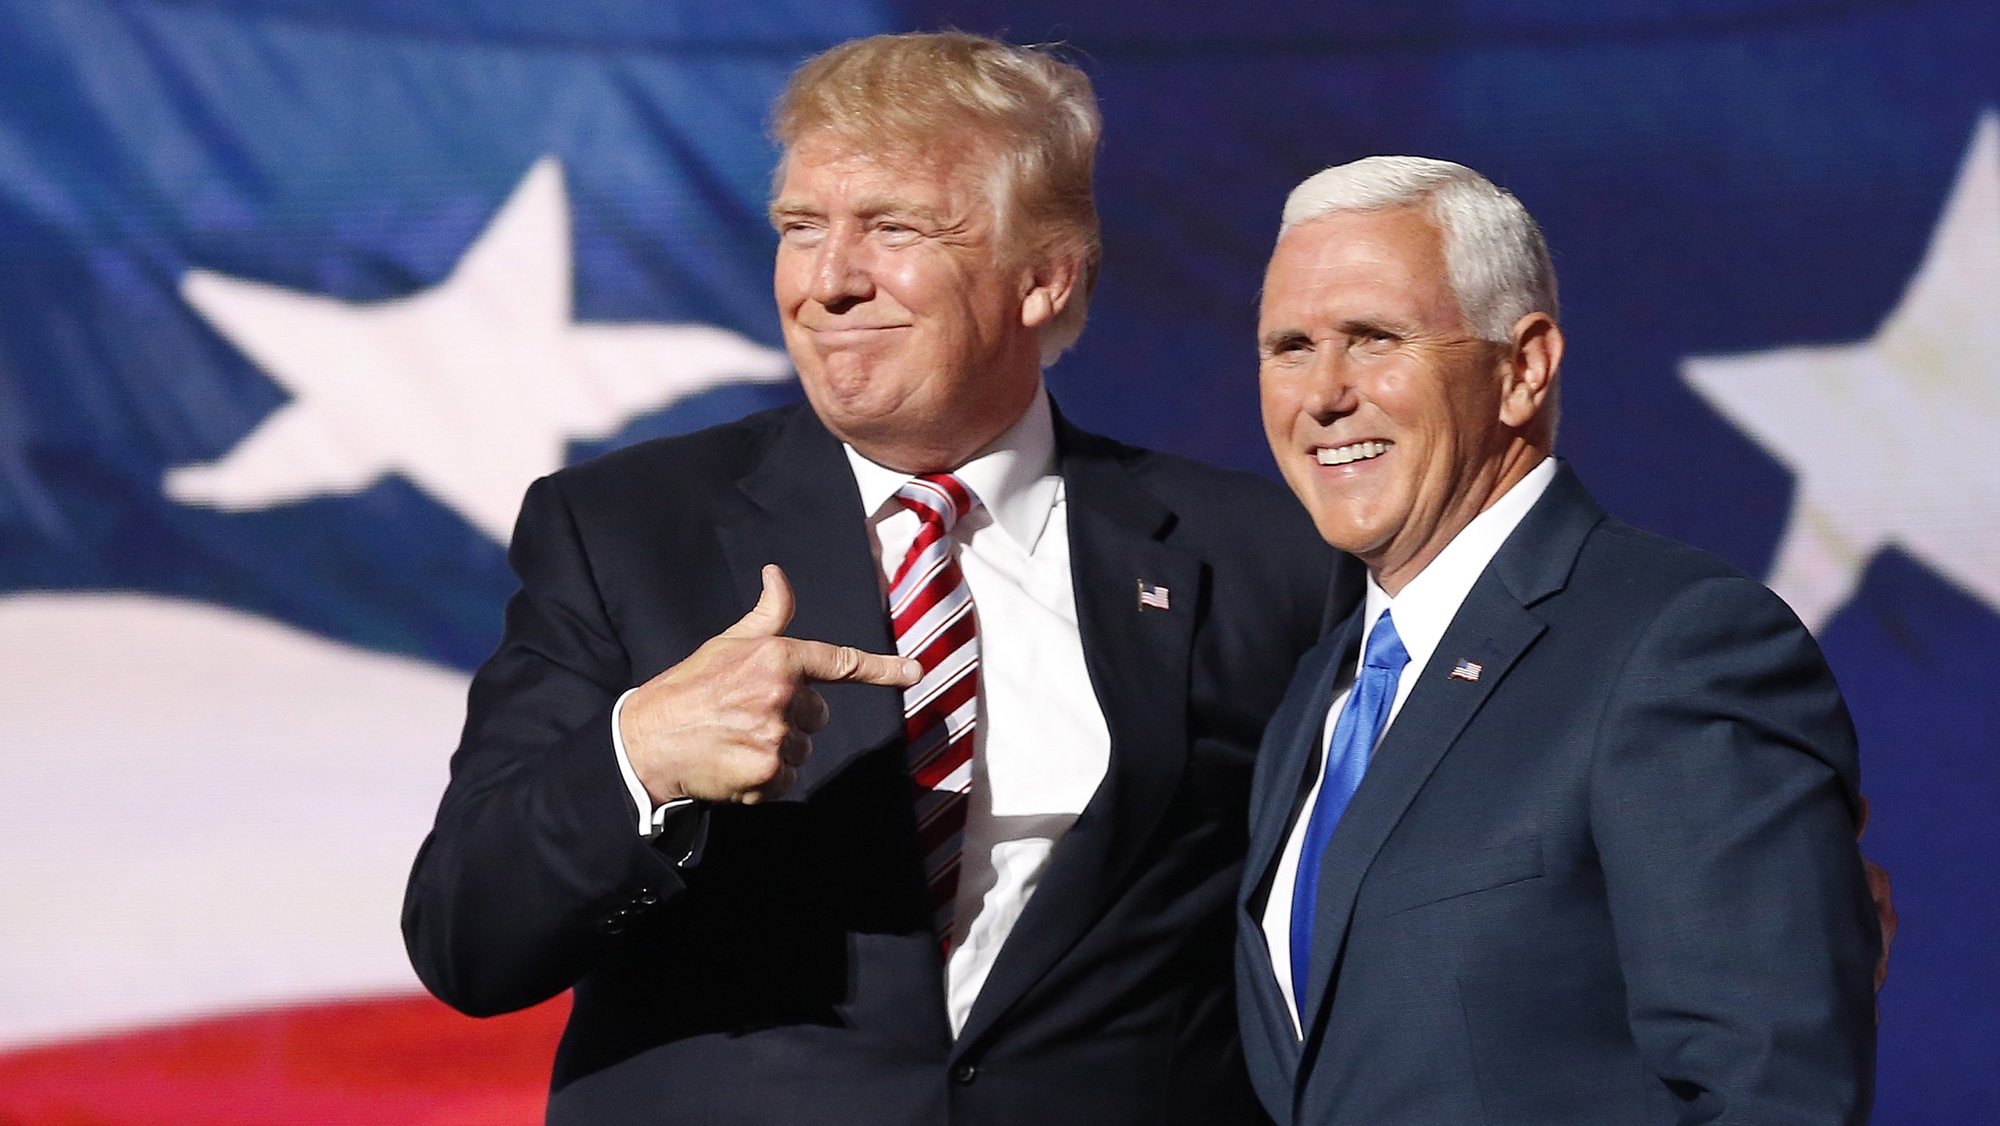 epa08939628 (FILE) Republican Presidential nominee Donald J. Trump (L) embraces Indiana Governor and Republican Vice Presidential nominee Mike Pence (R) during the third day of the 2016 Republican National Convention at Quicken Loans Arena in Cleveland, Ohio, USA, 20 July 2016. The four-day convention ended with Donald Trump formally accepting the nomination of the Republican Party as their presidential candidate in the 2016 election. The presidency of Donald Trump, which records two presidential impeachments, will end at noon on 20 January 2021.  EPA/MICHAEL REYNOLDS *** Local Caption *** 53089650